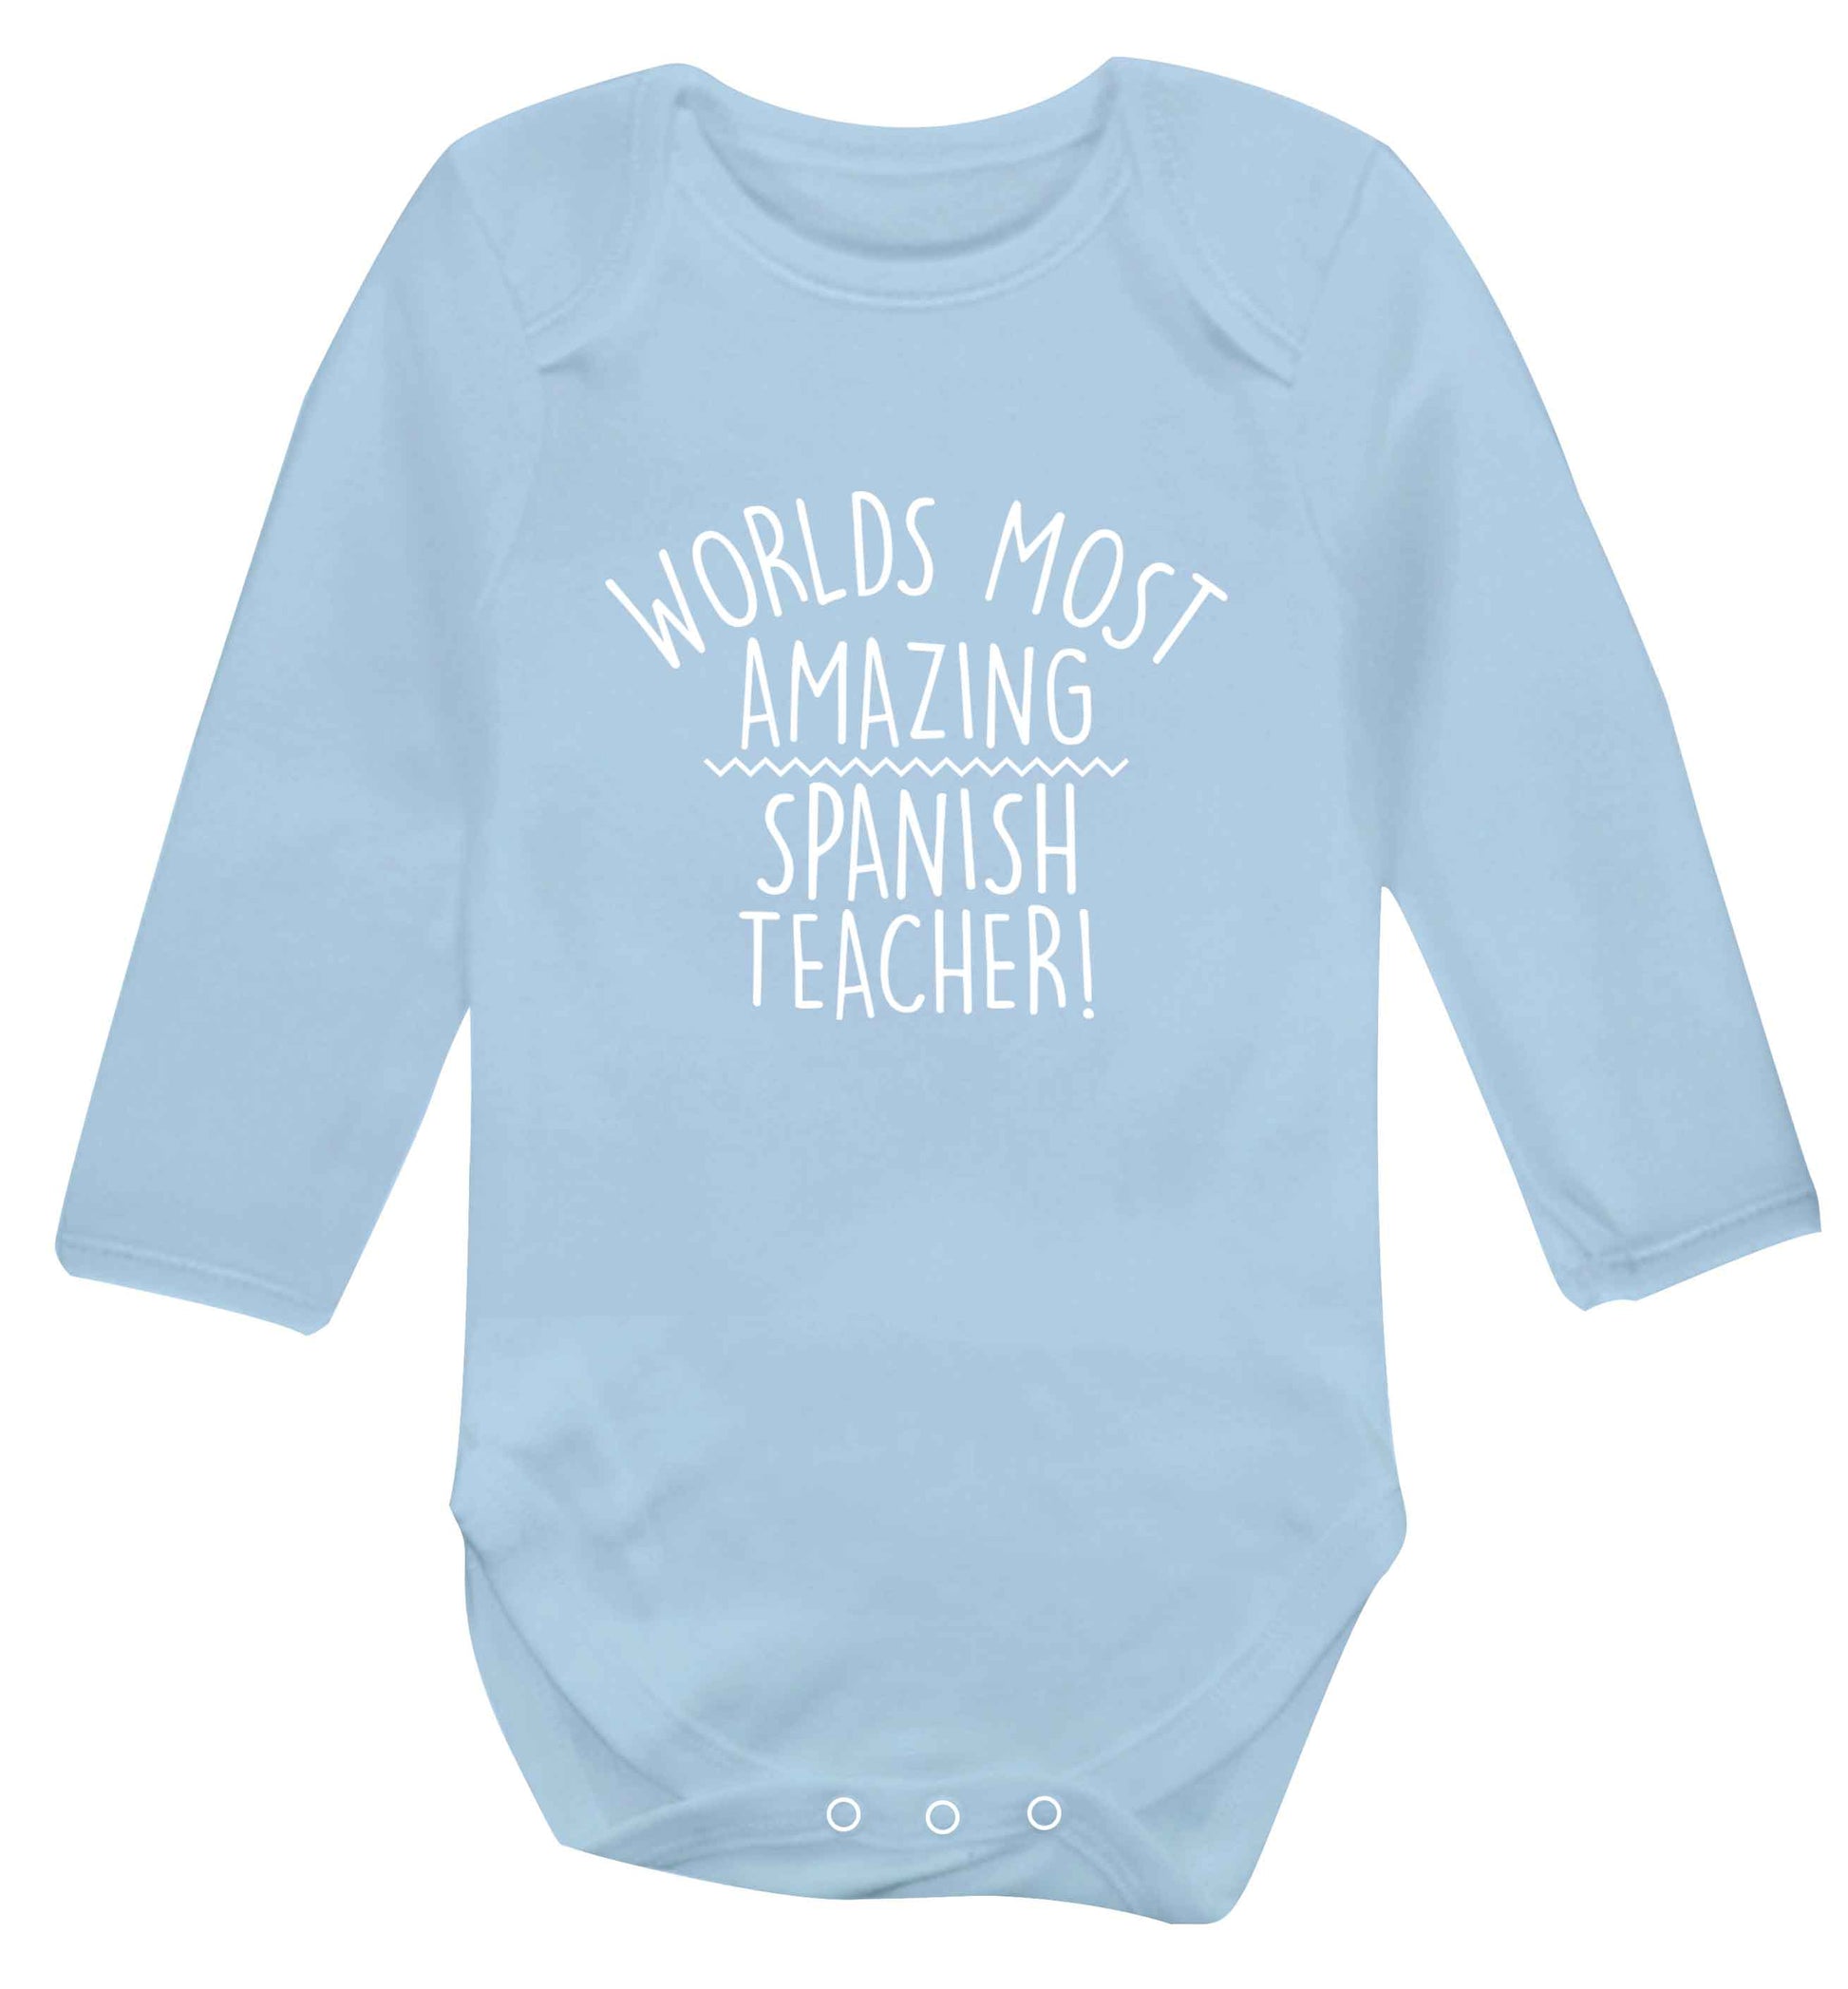 Worlds most amazing Spanish teacher baby vest long sleeved pale blue 6-12 months